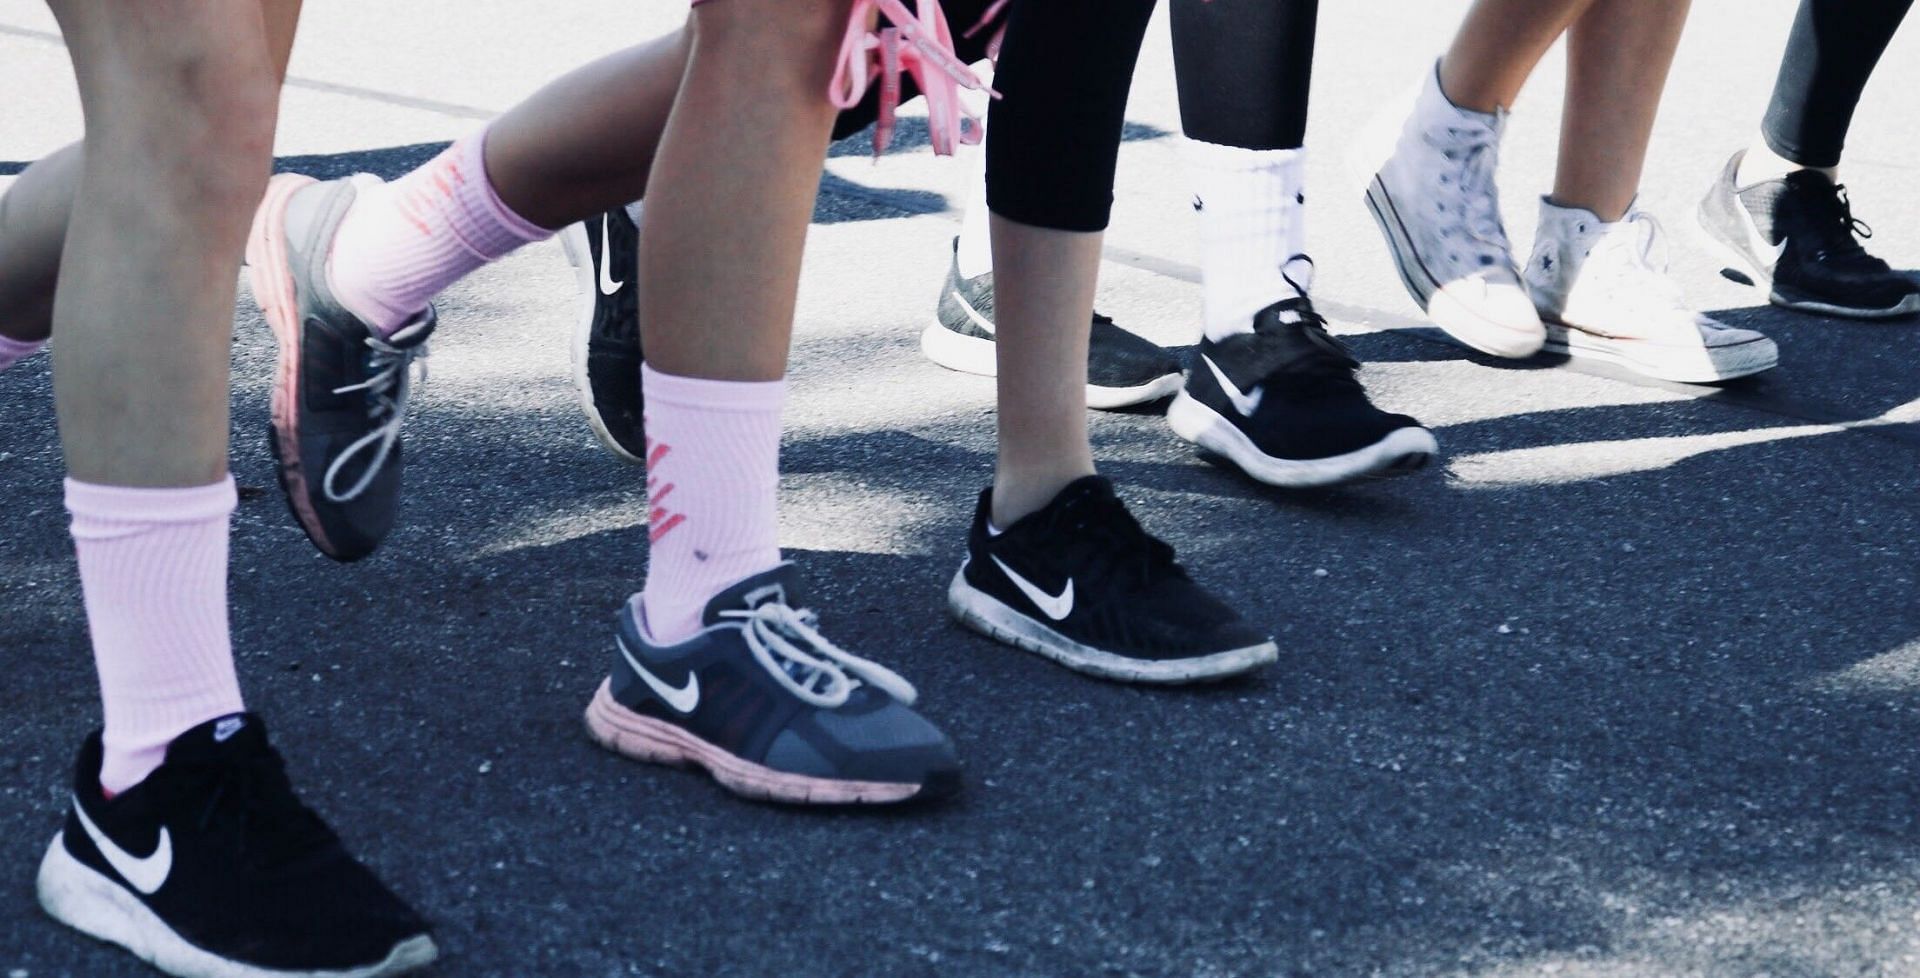 Walking shoes are usually ignored as standalone fitness activity equipment (Photo by sydney Rae on Unsplash)